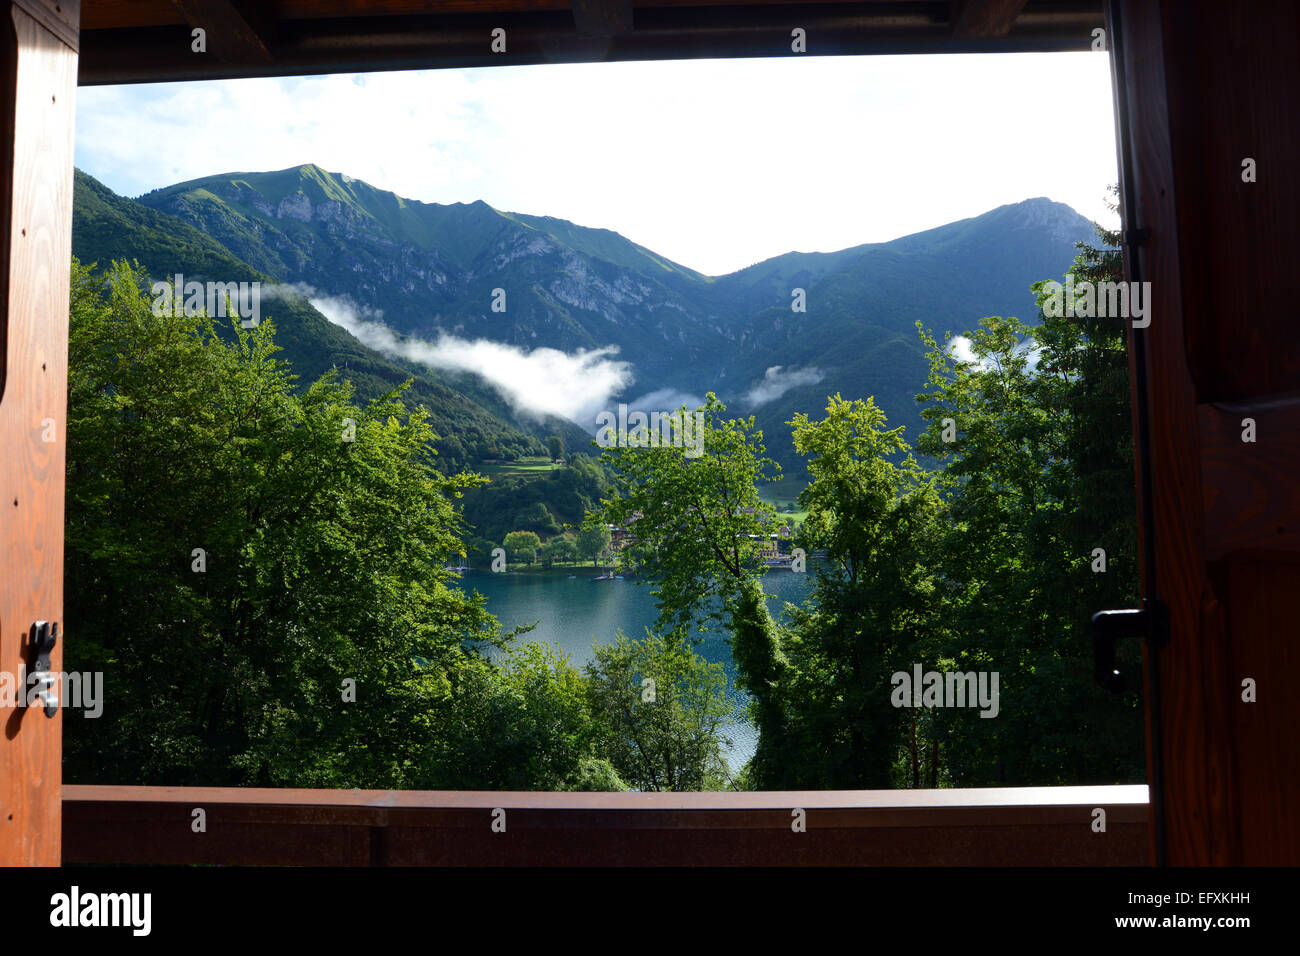 Mountain and lake view from a holiday home window, Lake Ledro, Dolomites, Italy. Stock Photo